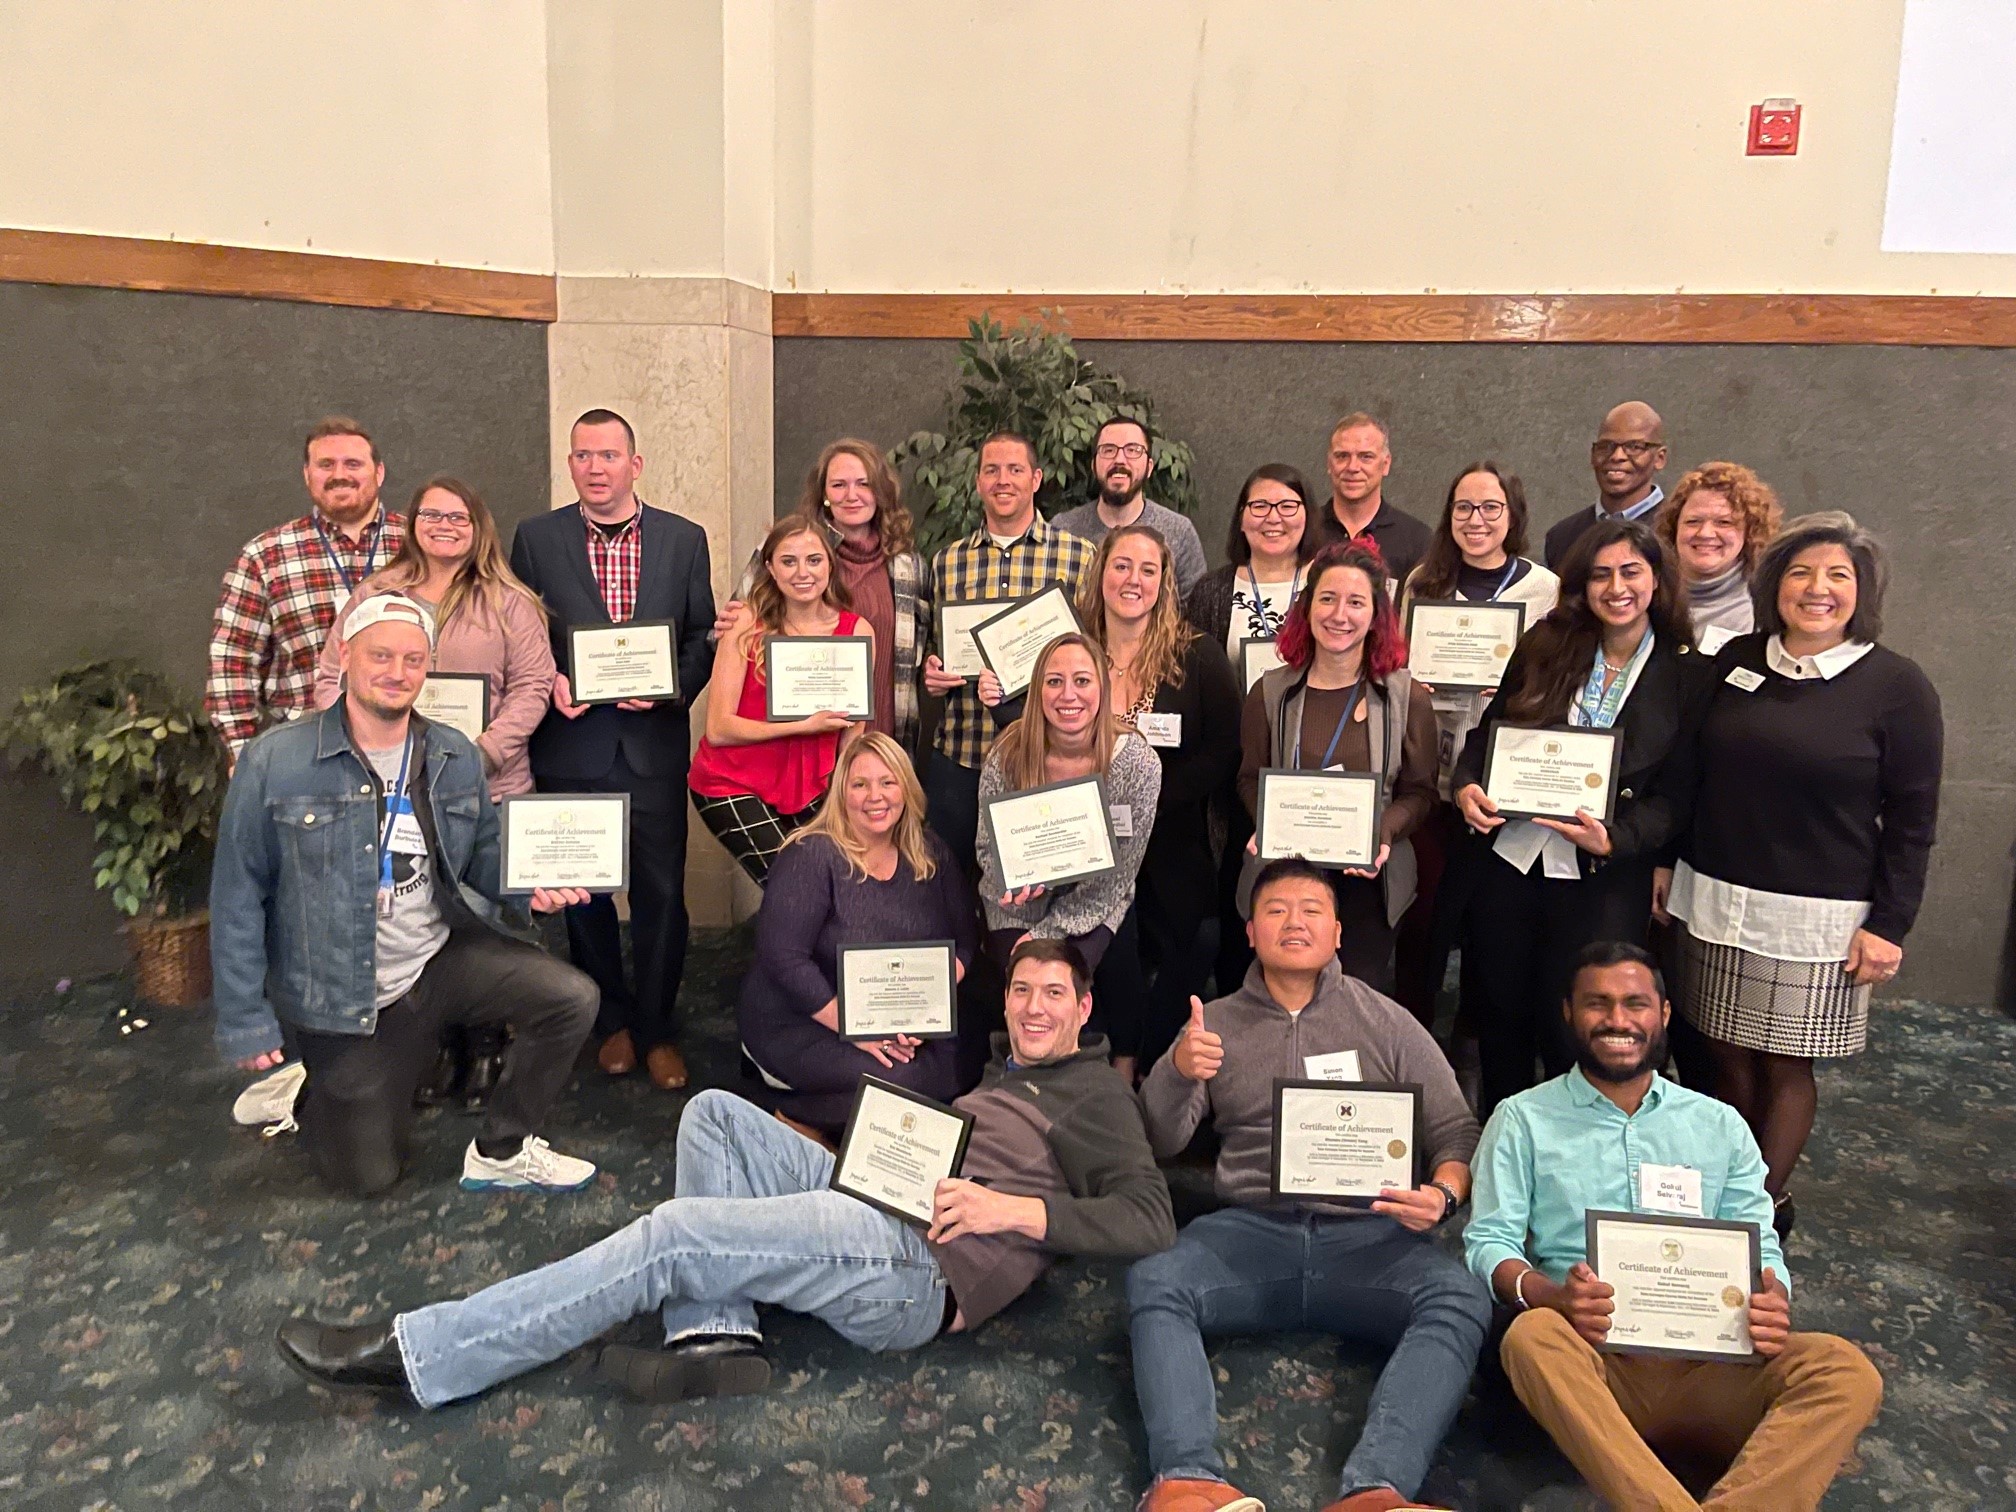 More LP Employees Complete the Dale Carnegie Program